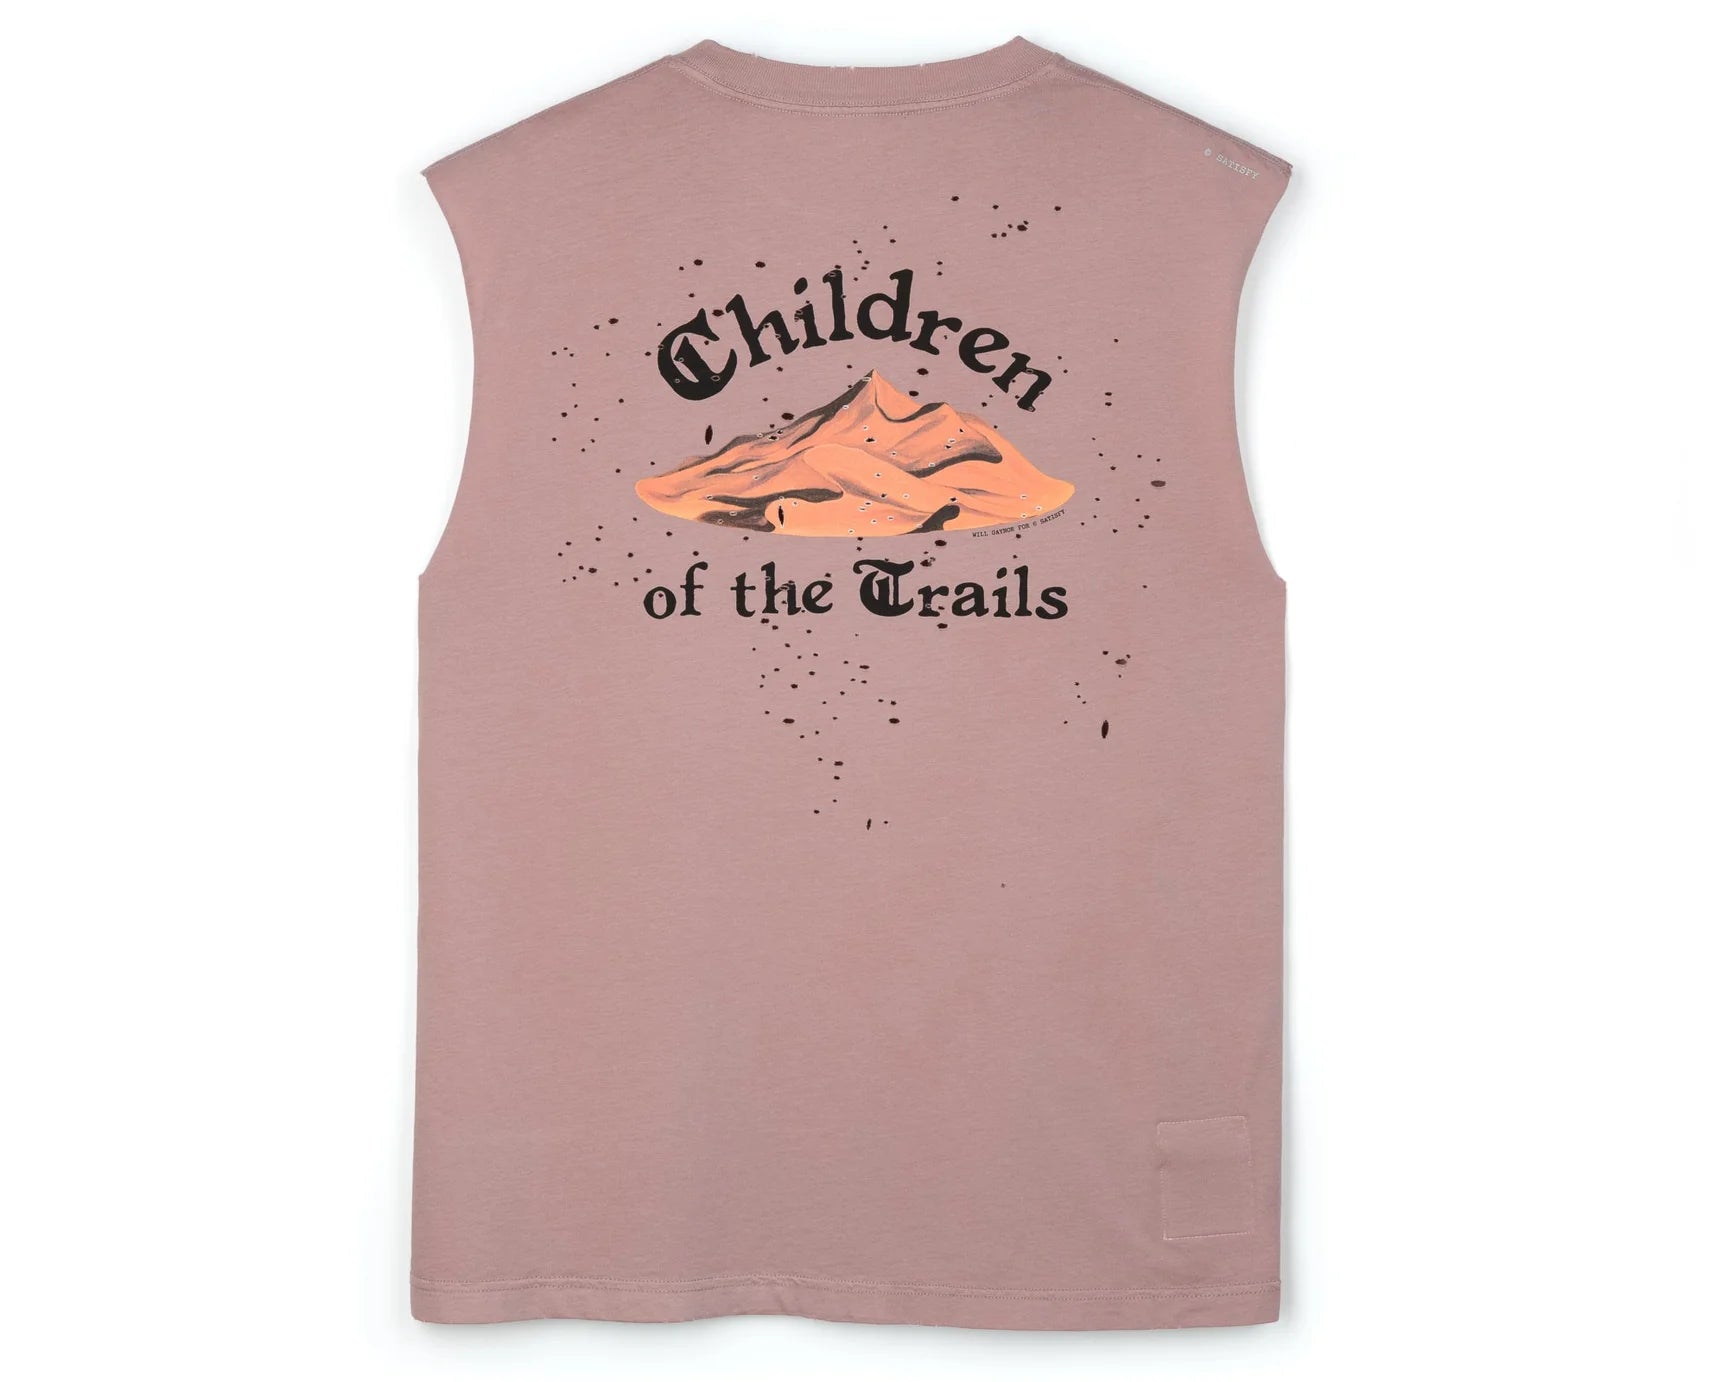 SATISFY - MothTech Muscle Tee - Children of the Trails - Space Camp